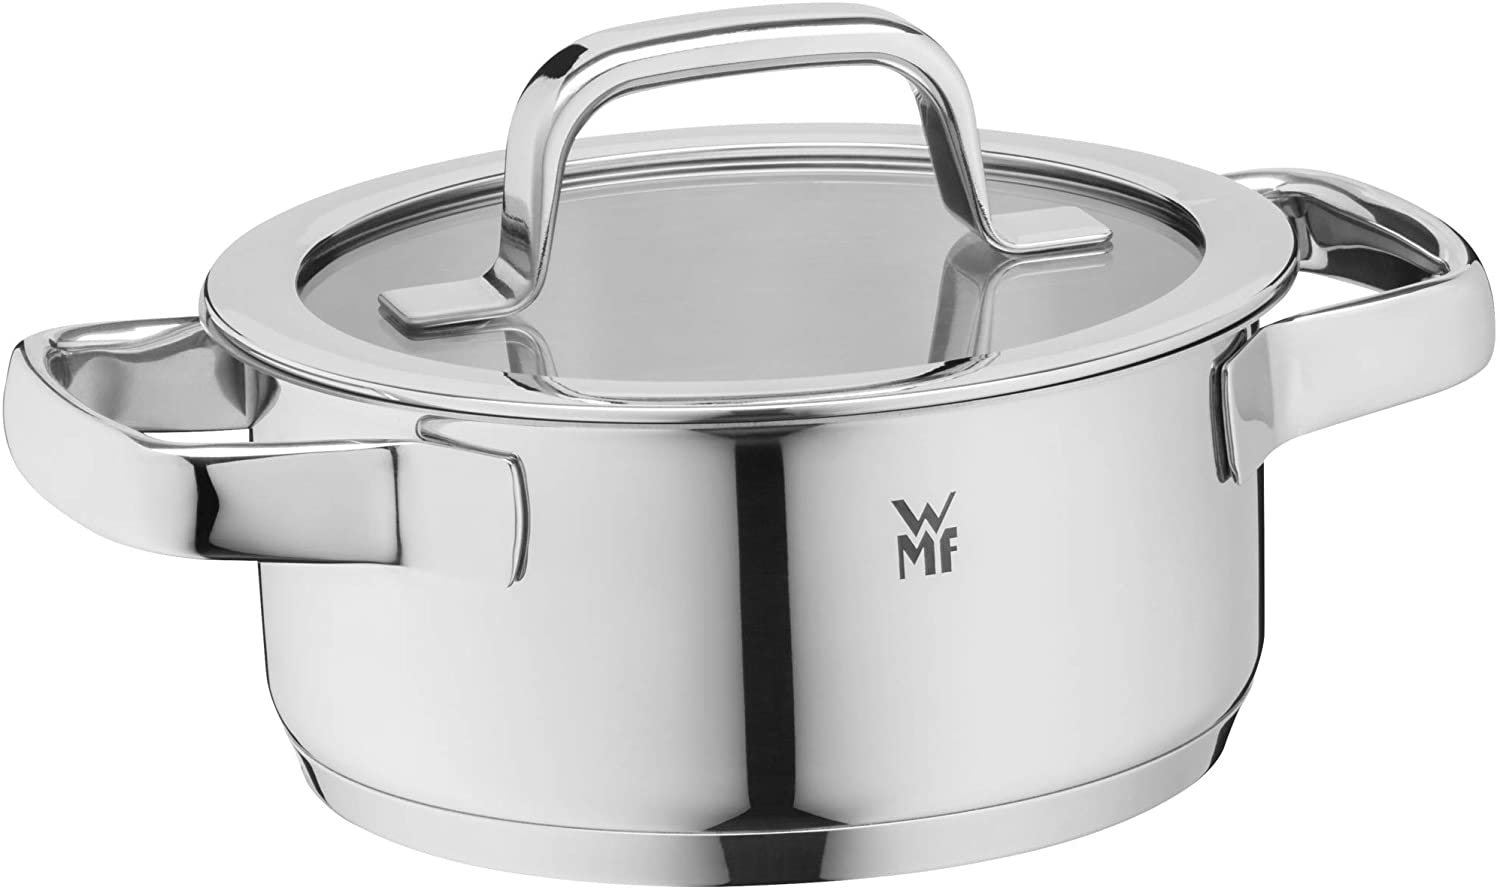 WMF Compact Cuisine Saucepan 20 cm Glass Lid 2.5 L Cromargan Polished Stainless Steel Inside Scale Stackable Saucepan Induction Uncoated